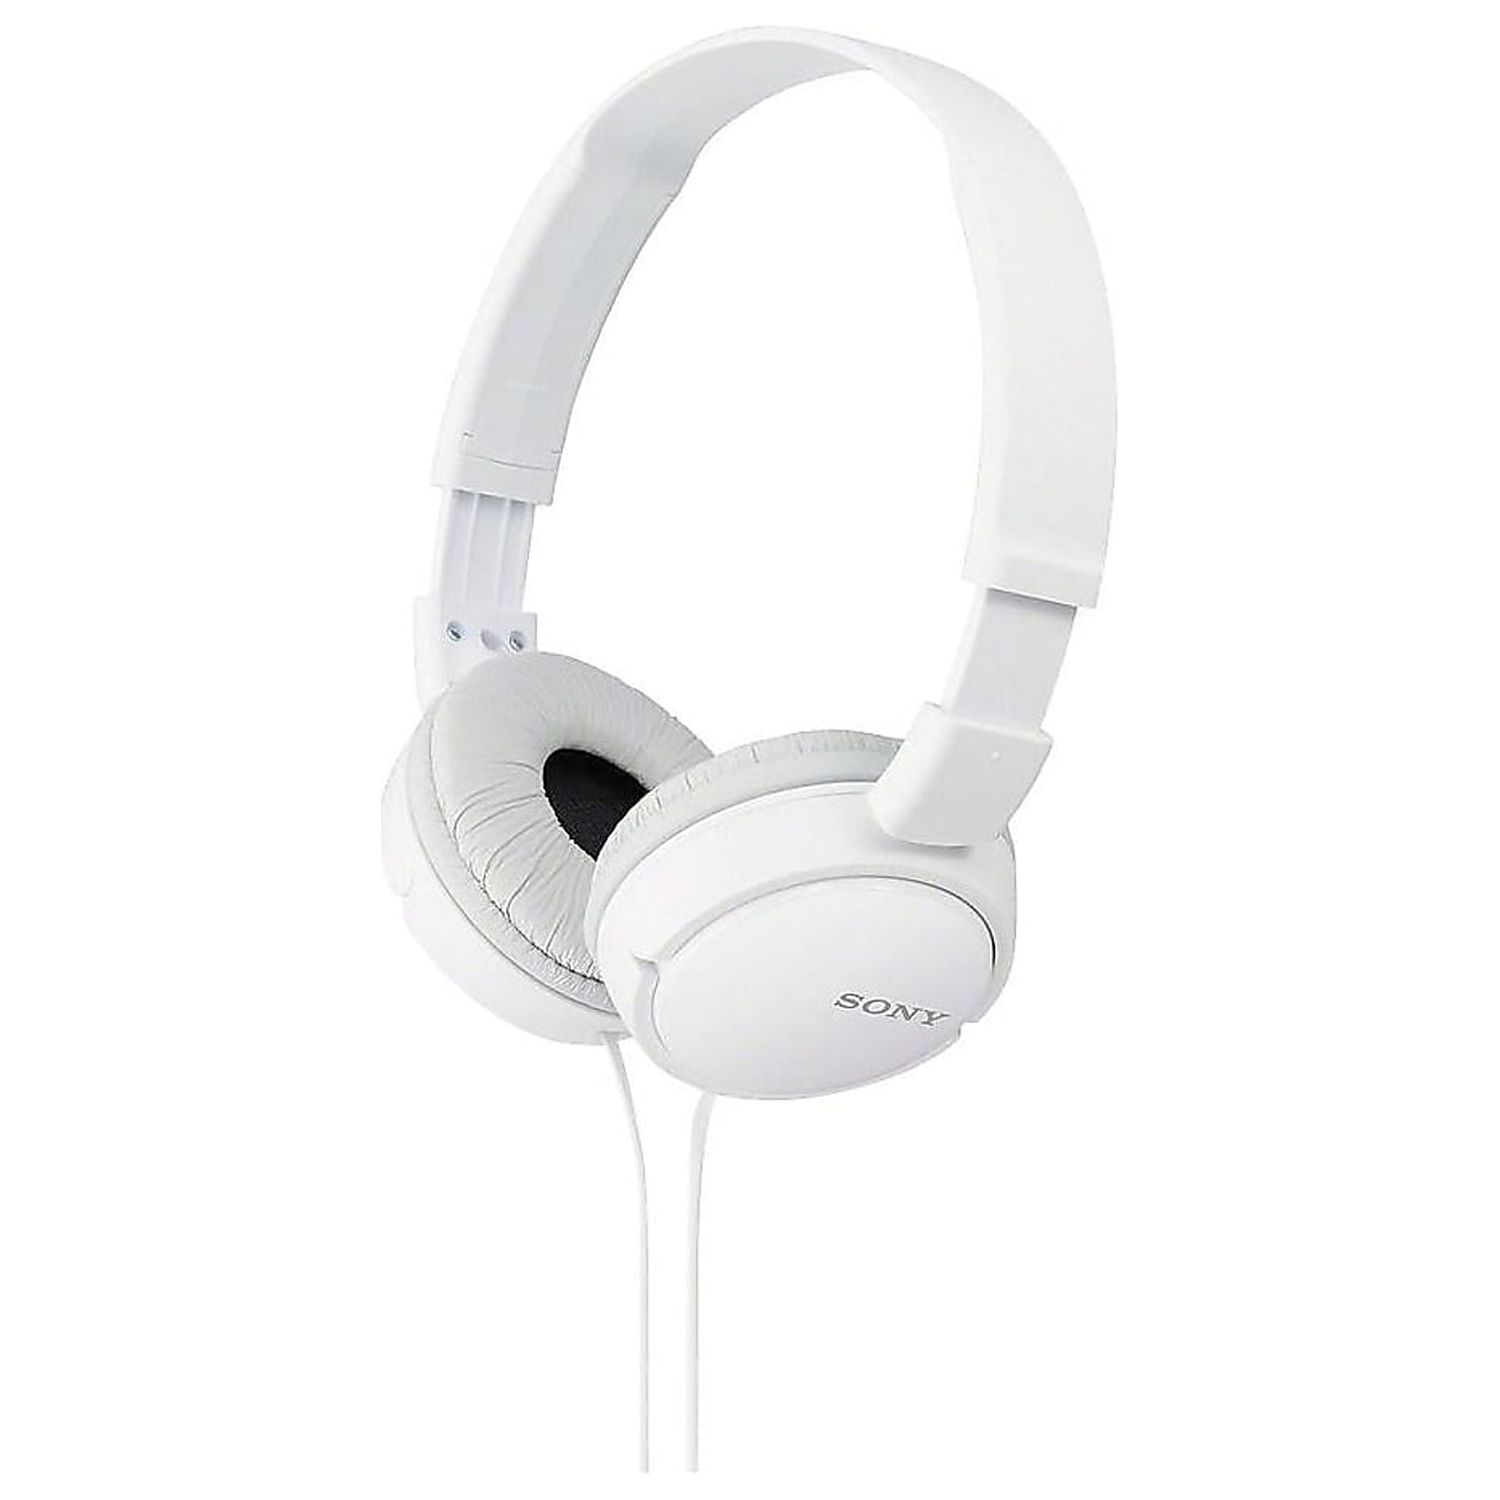 Sony MDR-ZX100/WHI - ZX Series - headphones - full size - wired - 3.5 mm jack - white - image 1 of 2